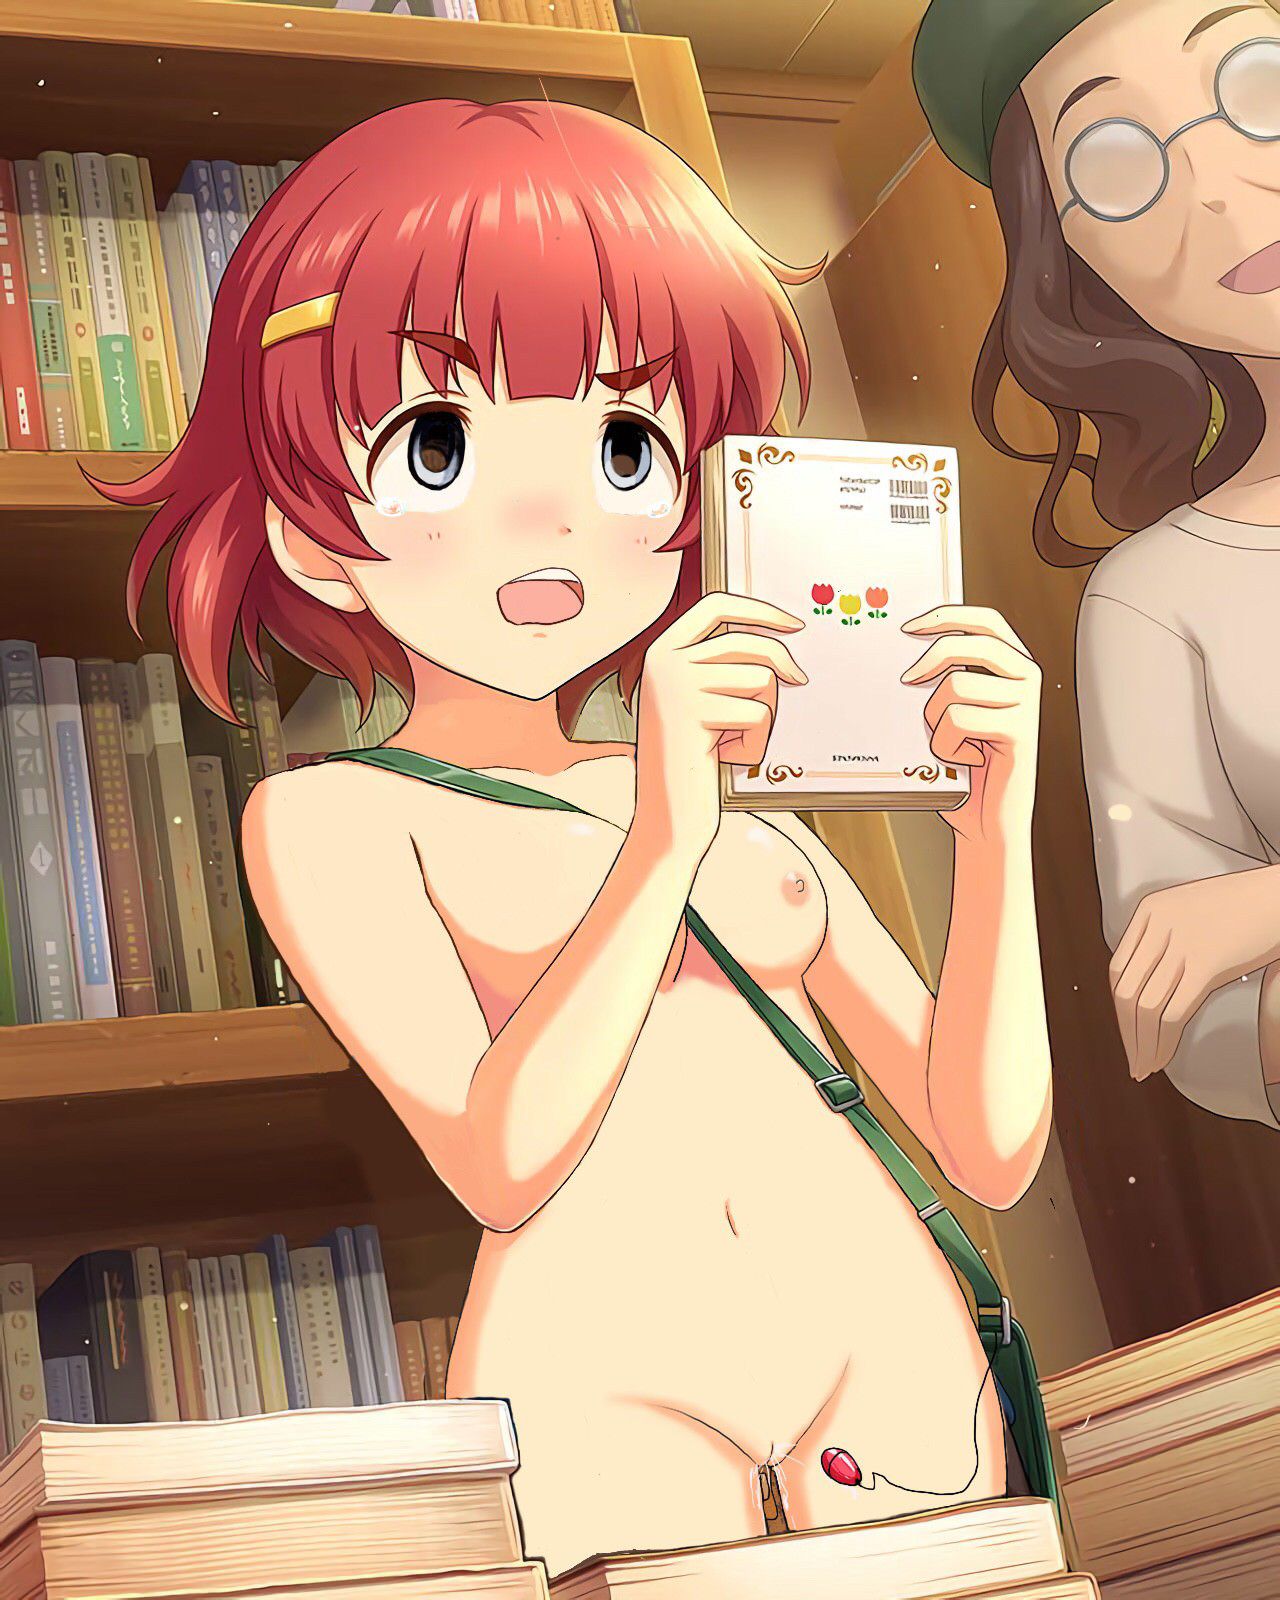 [Idolmaster] of the eye mass stripping of Photoshop and erotic Photoshop is wonderful that 43 19